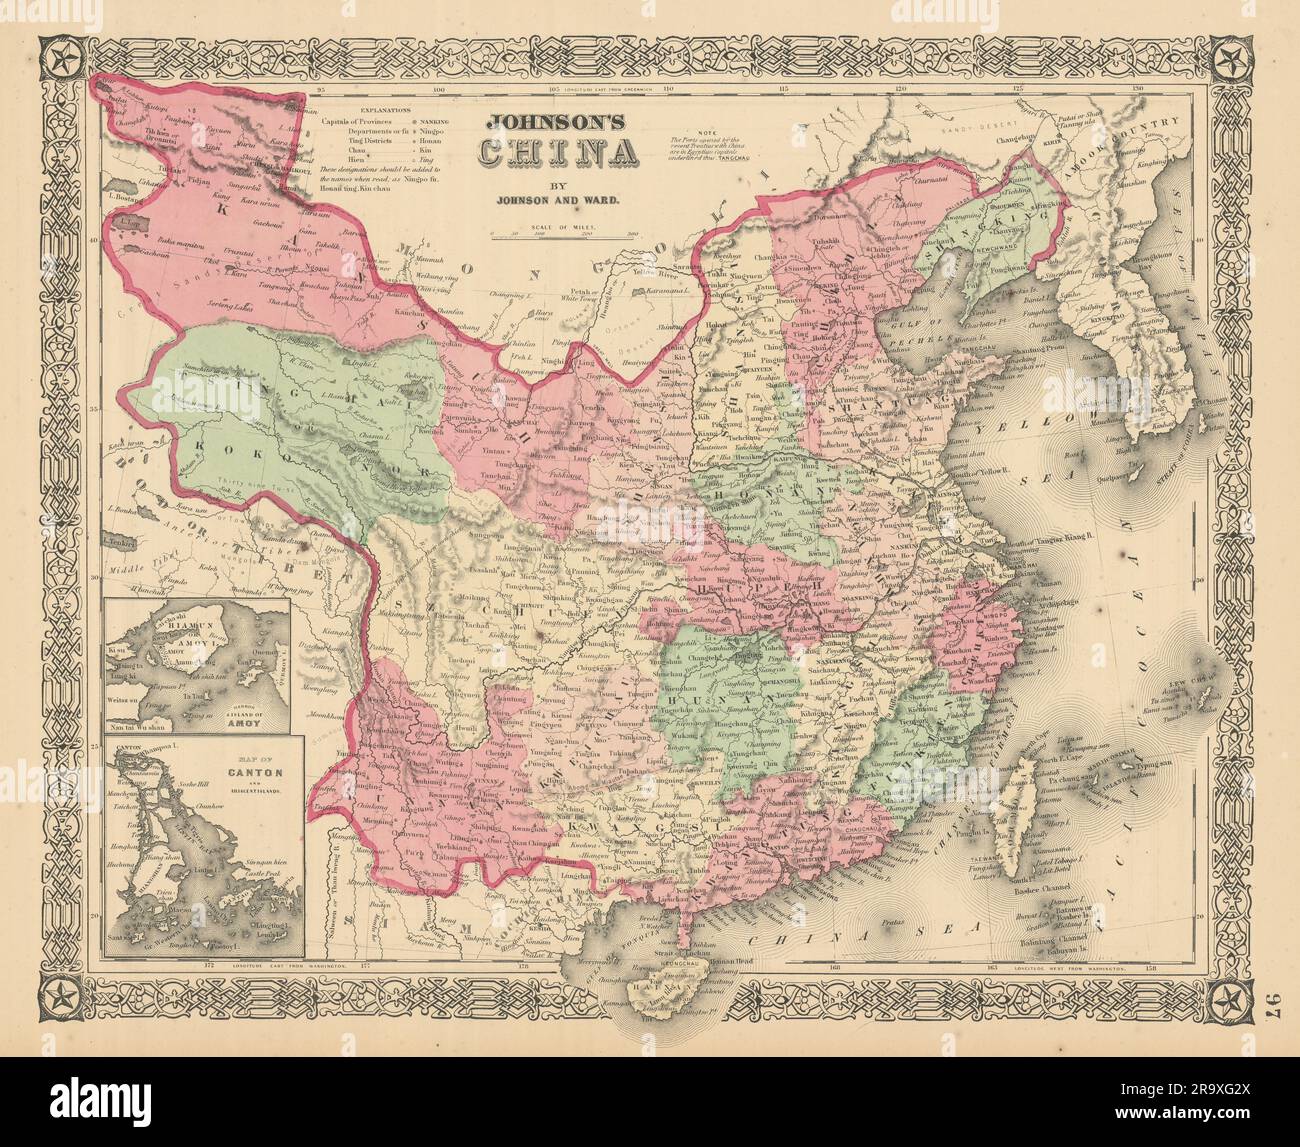 new york to canton china map